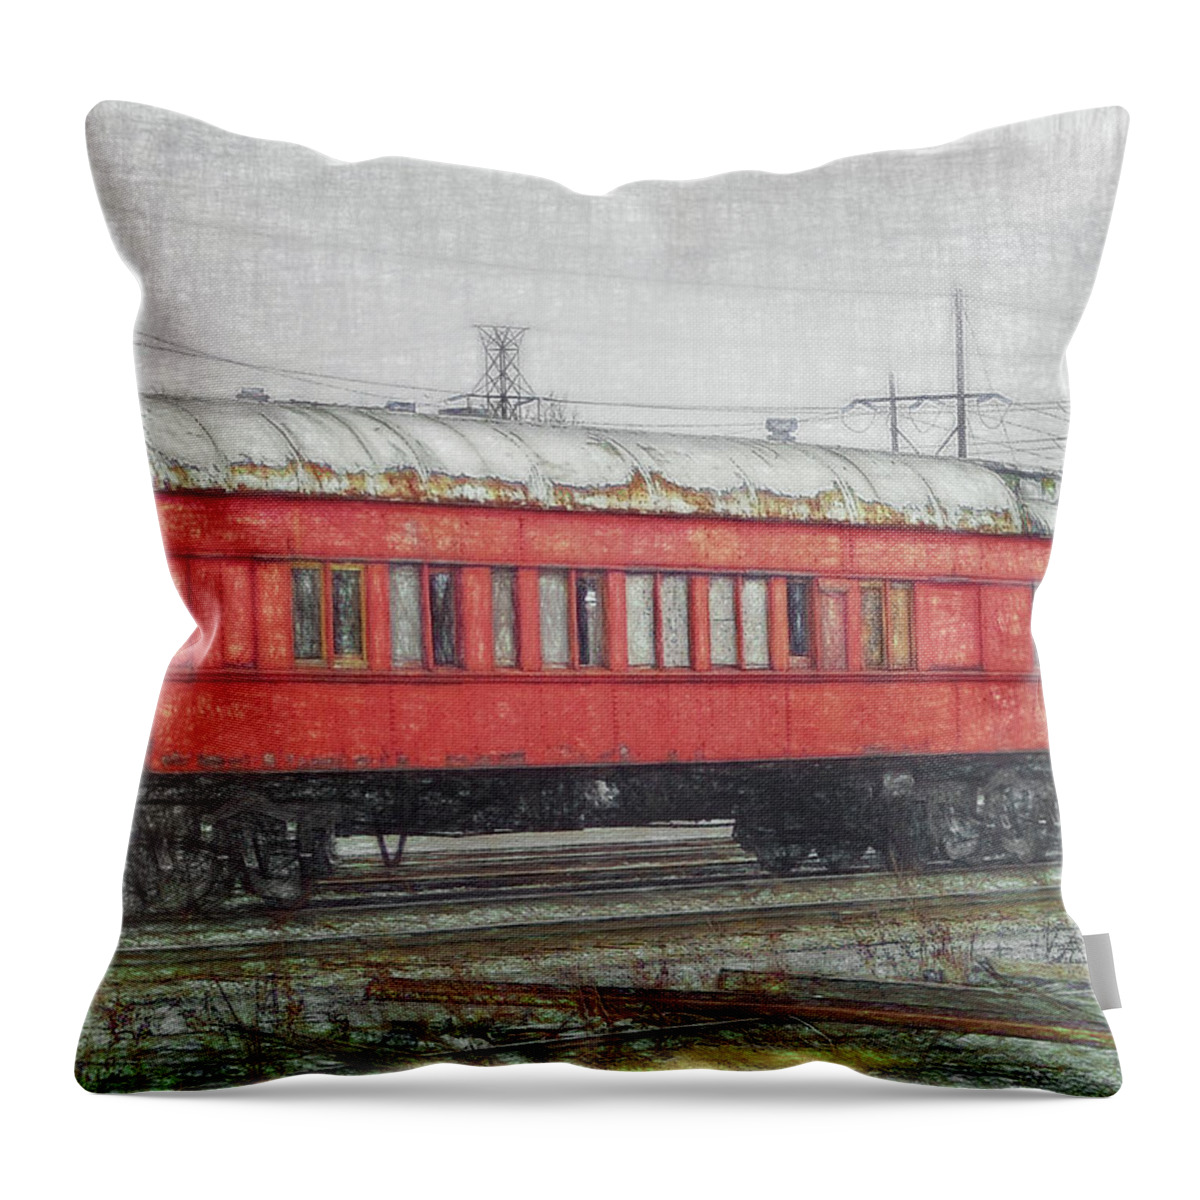 Red Throw Pillow featuring the digital art Faded Glory - Middle Of The Line by Leslie Montgomery